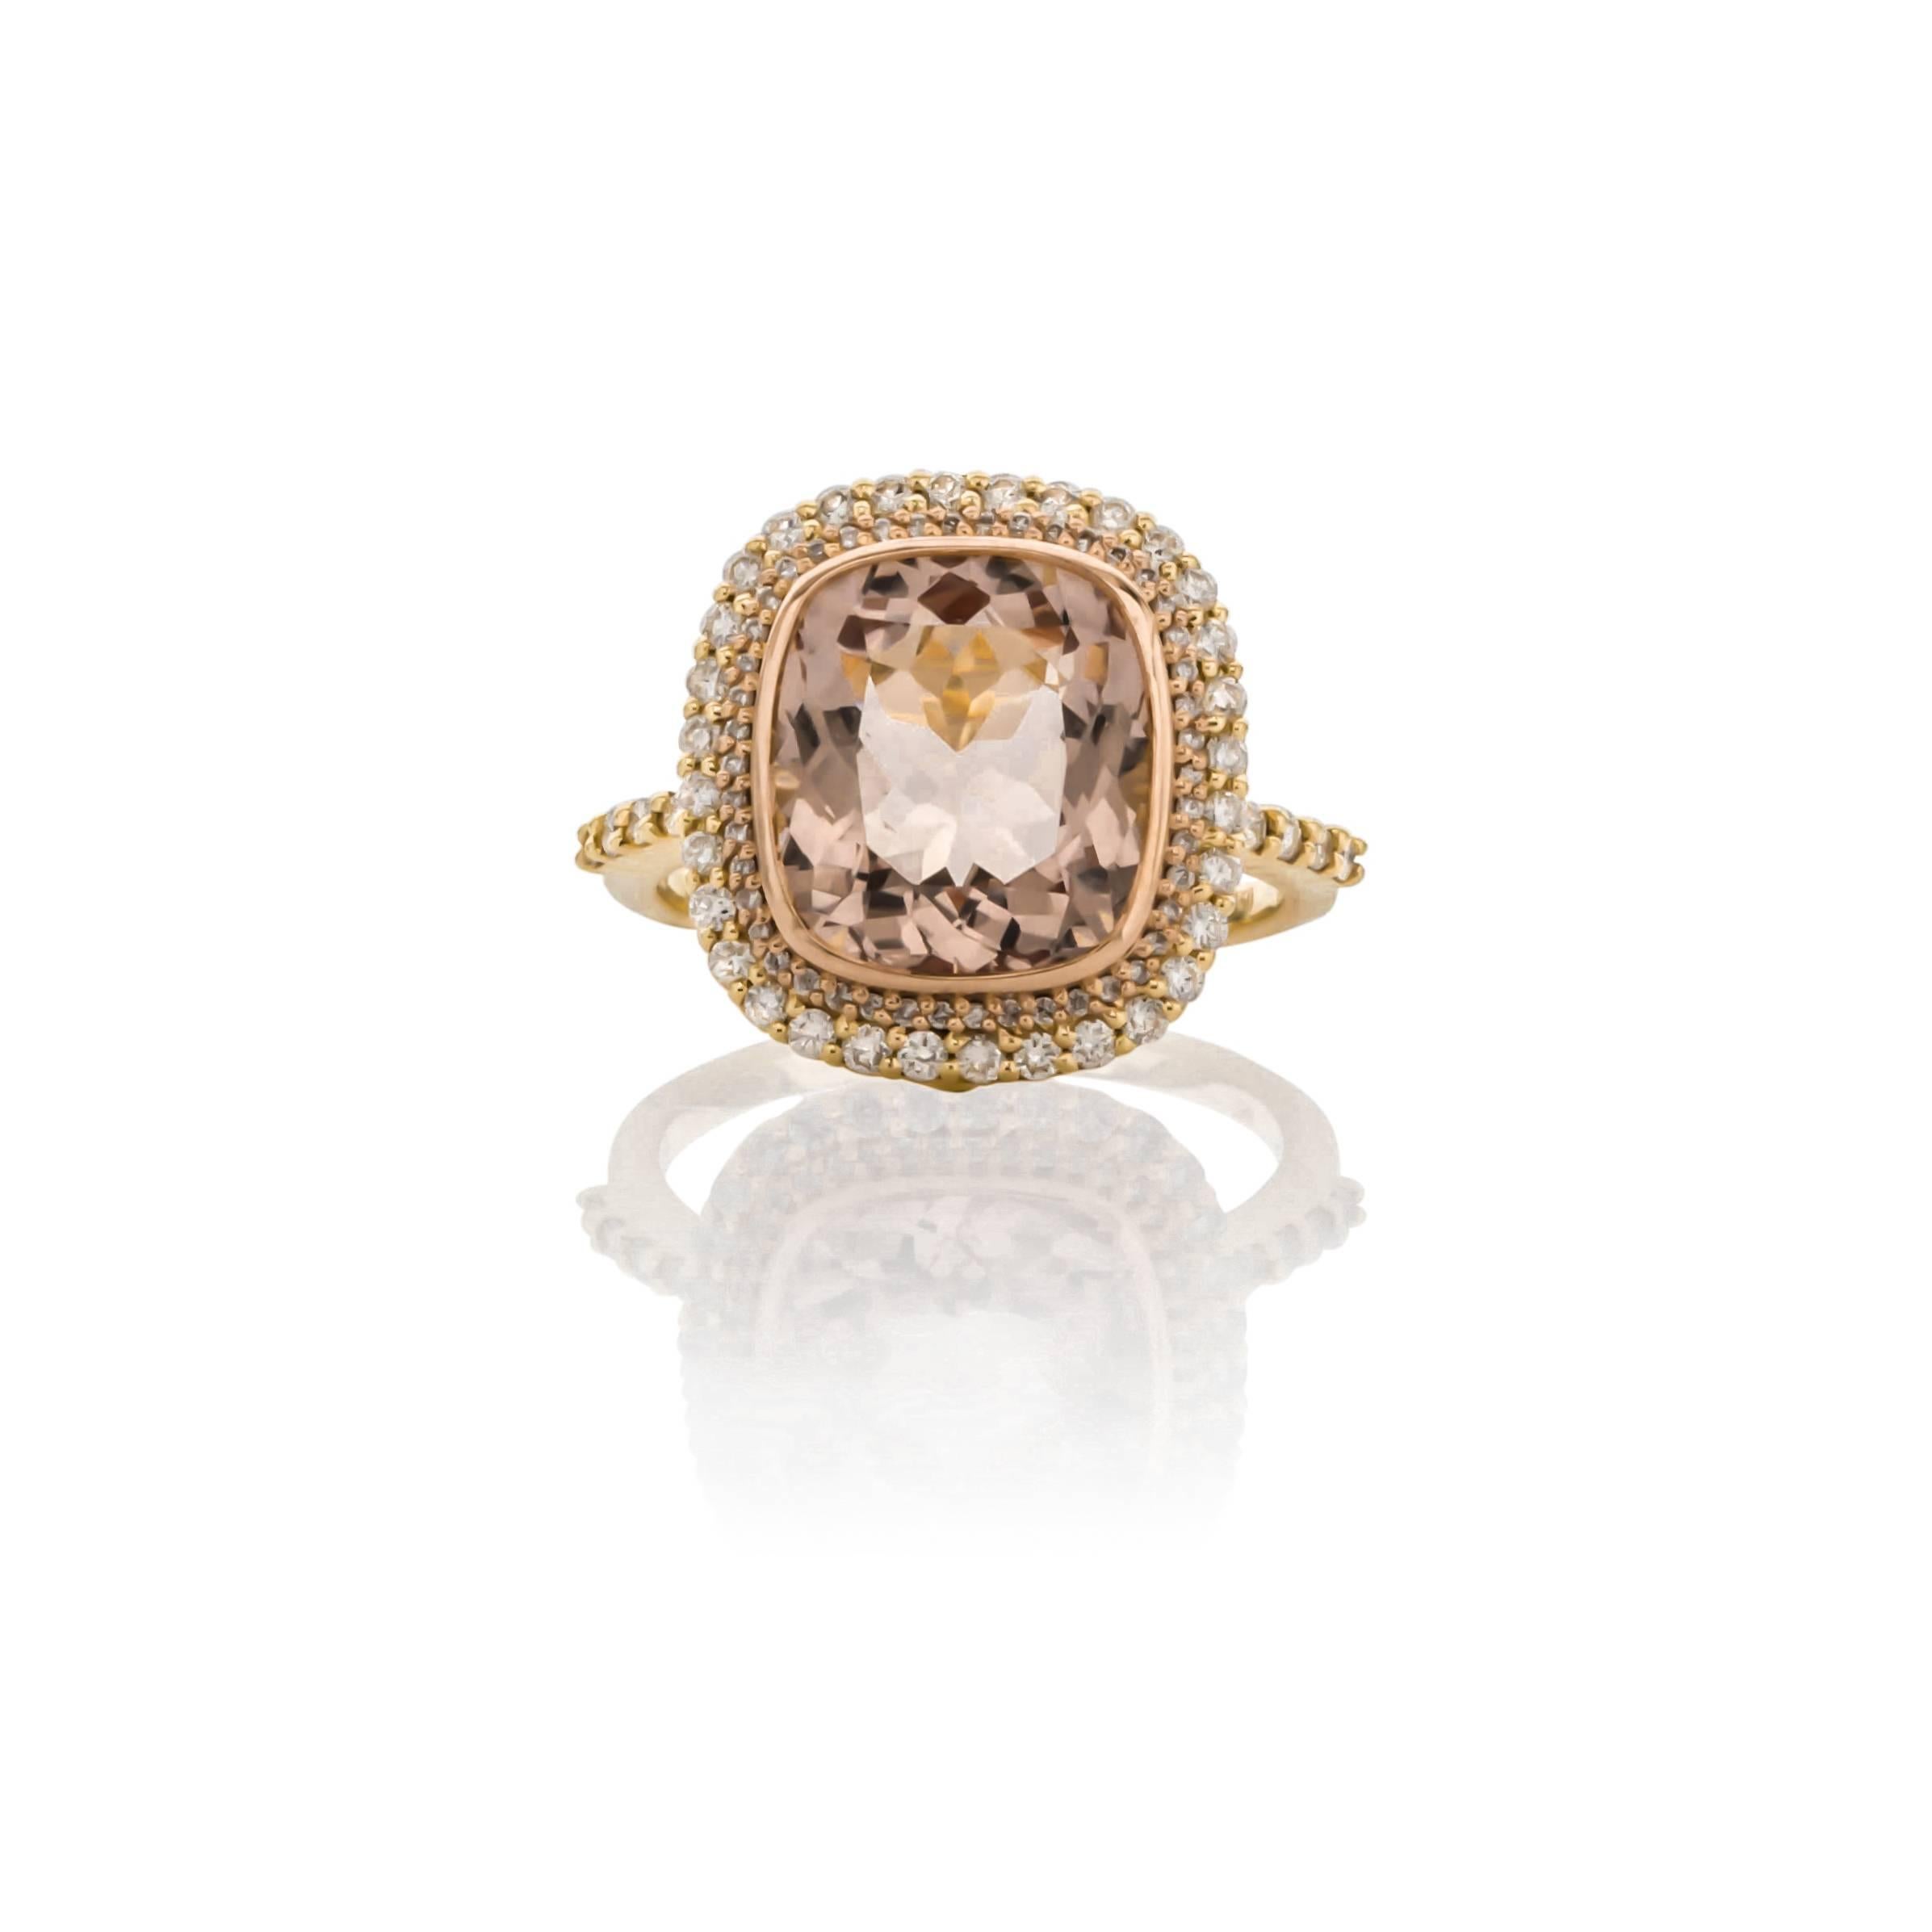 18K yellow and rose gold morganite and diamond ring. Set with one cushion cut morganite weighing 4.53 carats of fine color and clarity, surrounded by ninety round brilliant cut diamonds weighing .55 carats total weight, G color and VS clarity.